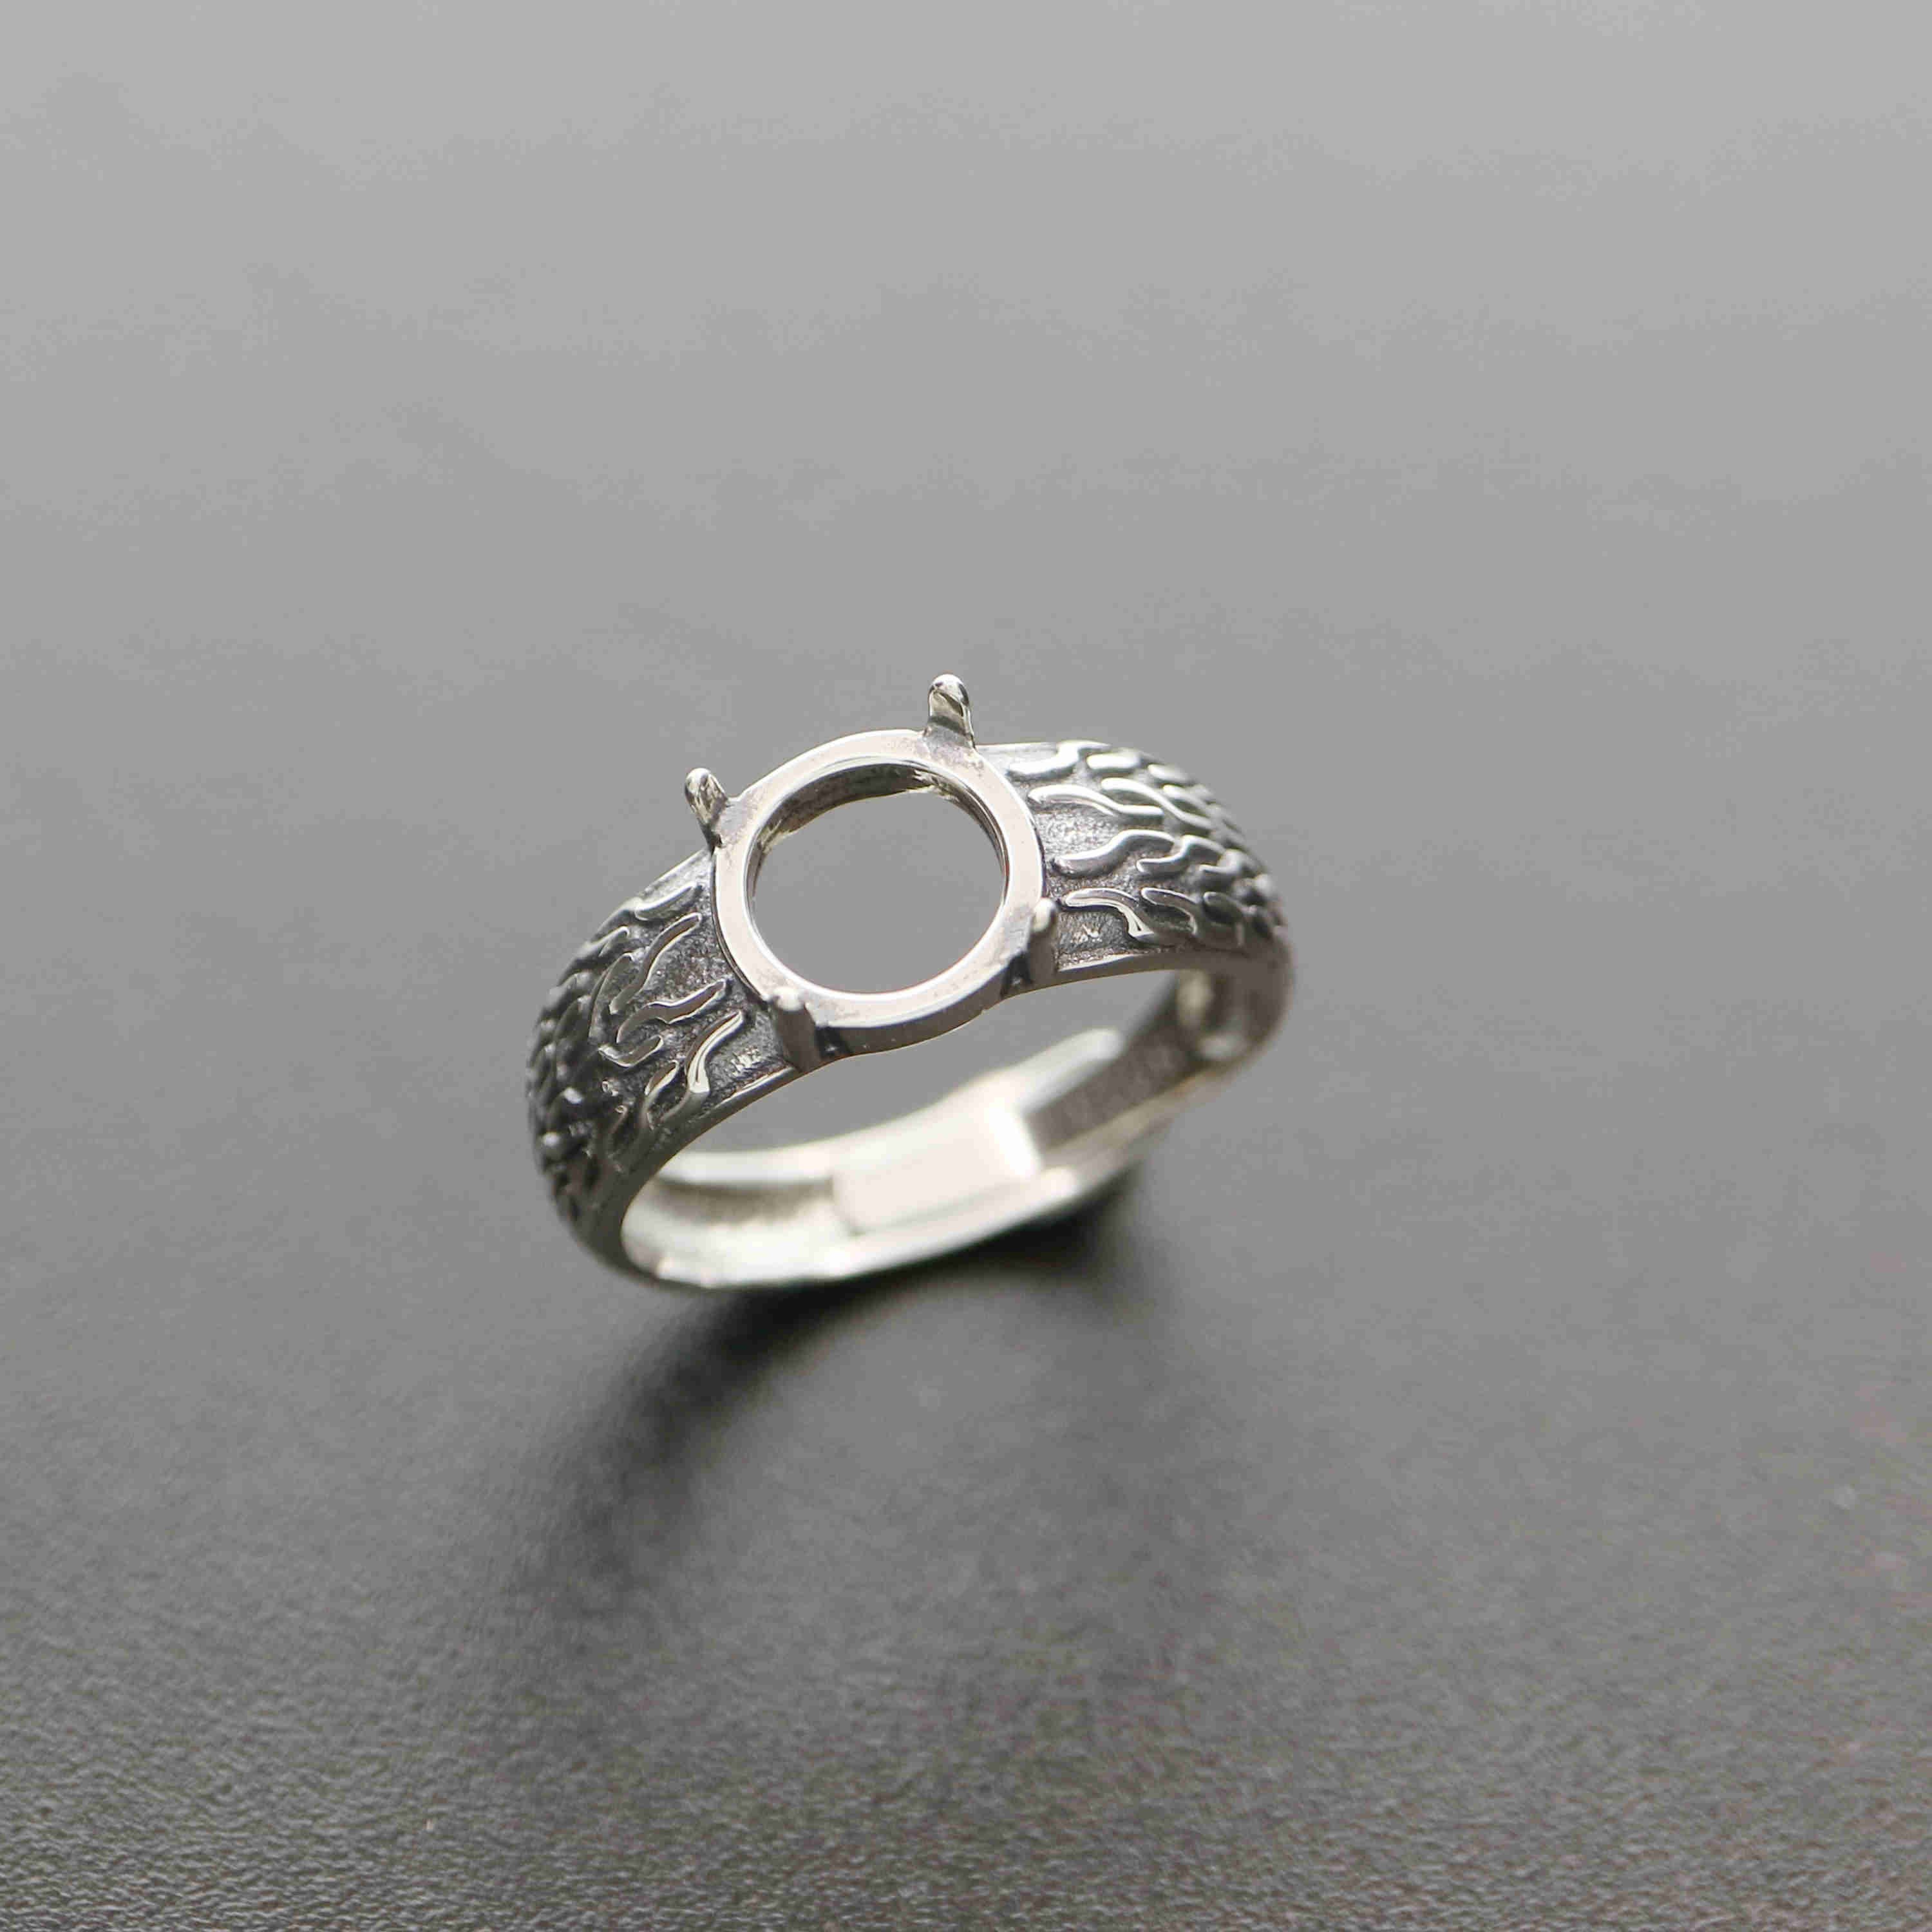 1Pcs 8MM Round Vintage Style Antiqued Silver Gems Cabochon Stone Prong Bezel Solid 925 Sterling Silver Adjustable Ring Settings 1213044 - Click Image to Close